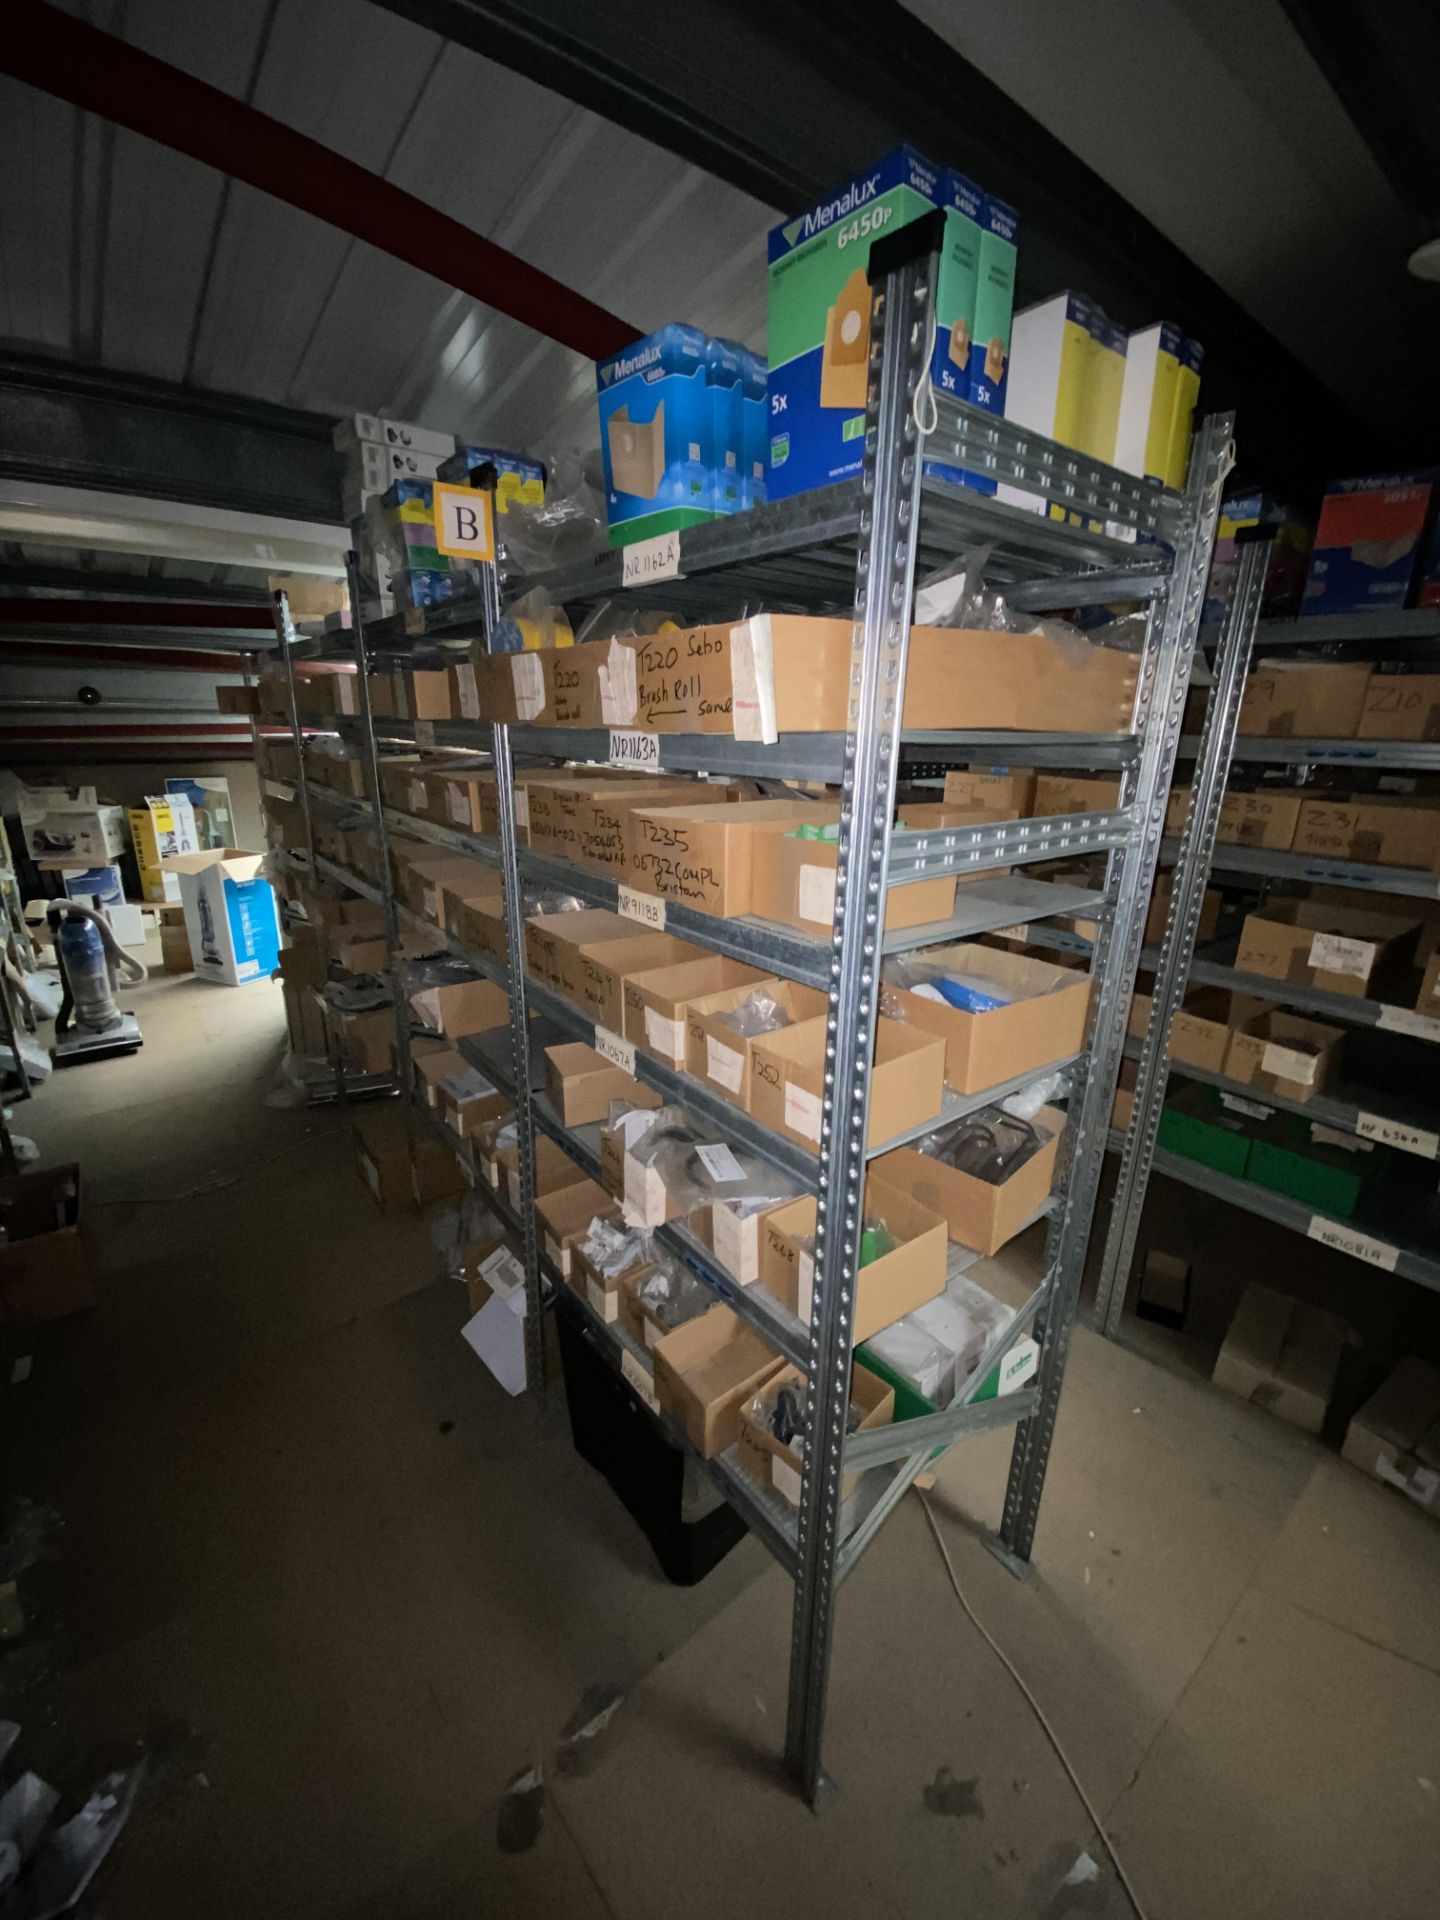 Four Bay Multi-Tier Galvanised Steel Stock Rack, each bay approx. 950mm x 500mm, up to approx. 2m - Image 2 of 2